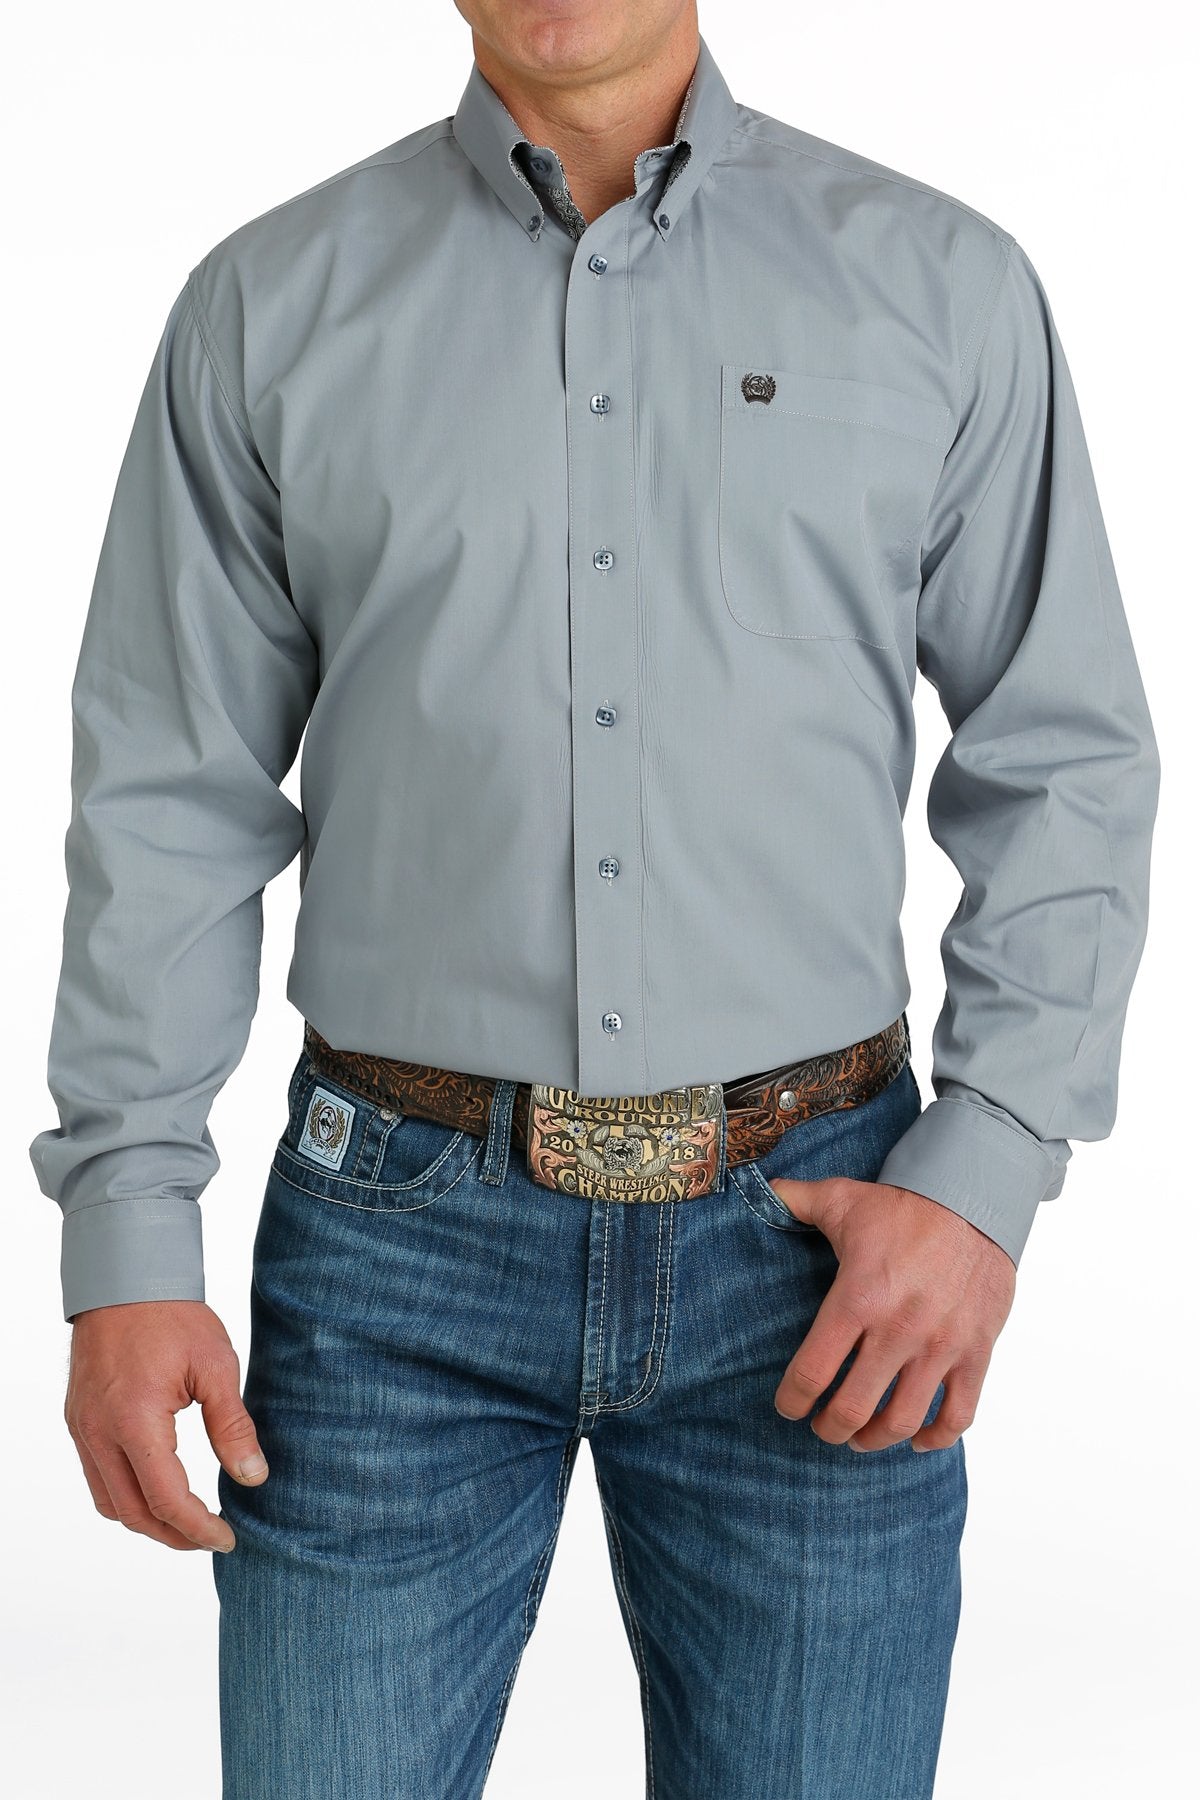 Men's Solid Grey Button Down Western Shirt with Printed Cuffs